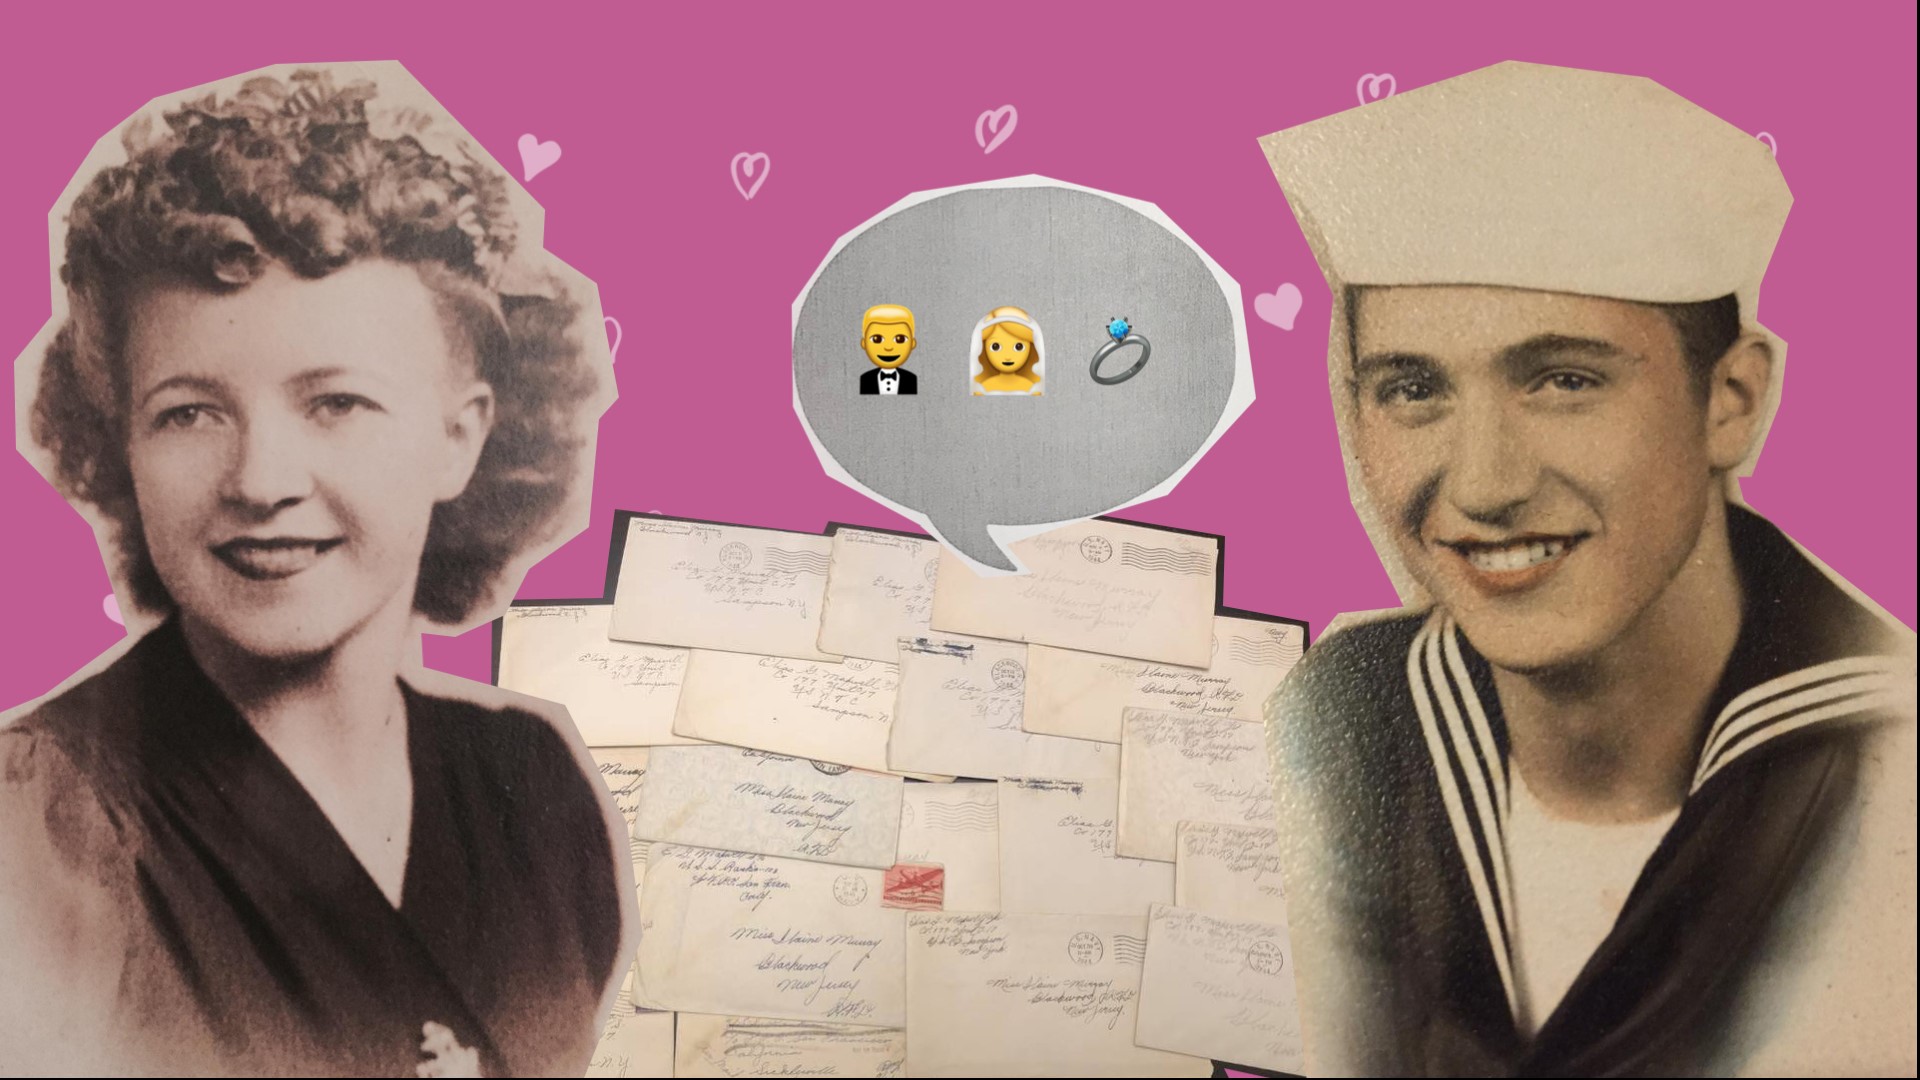 After two friends stumbled upon a stack of old love letters from World War II, they set out to find out how the love story ended.